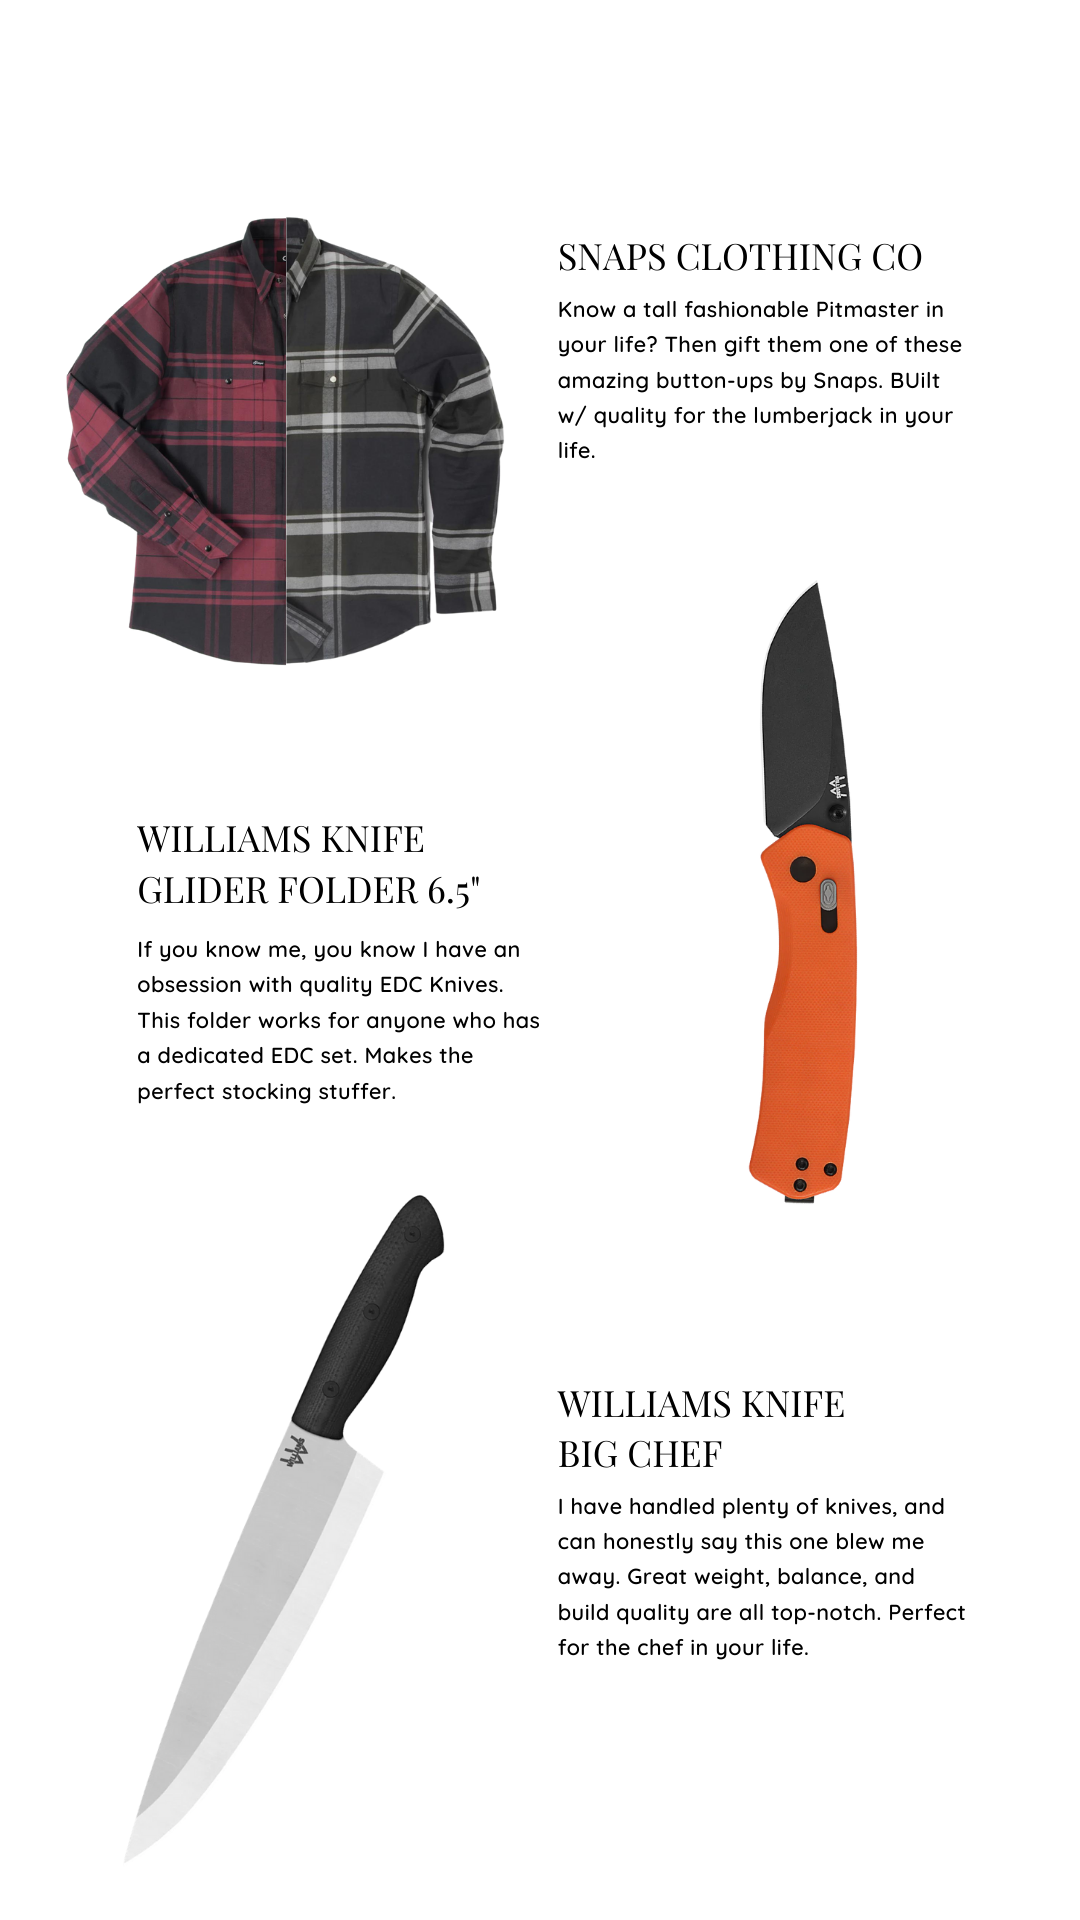 The Ultimate Knife Gift Guide For 2023